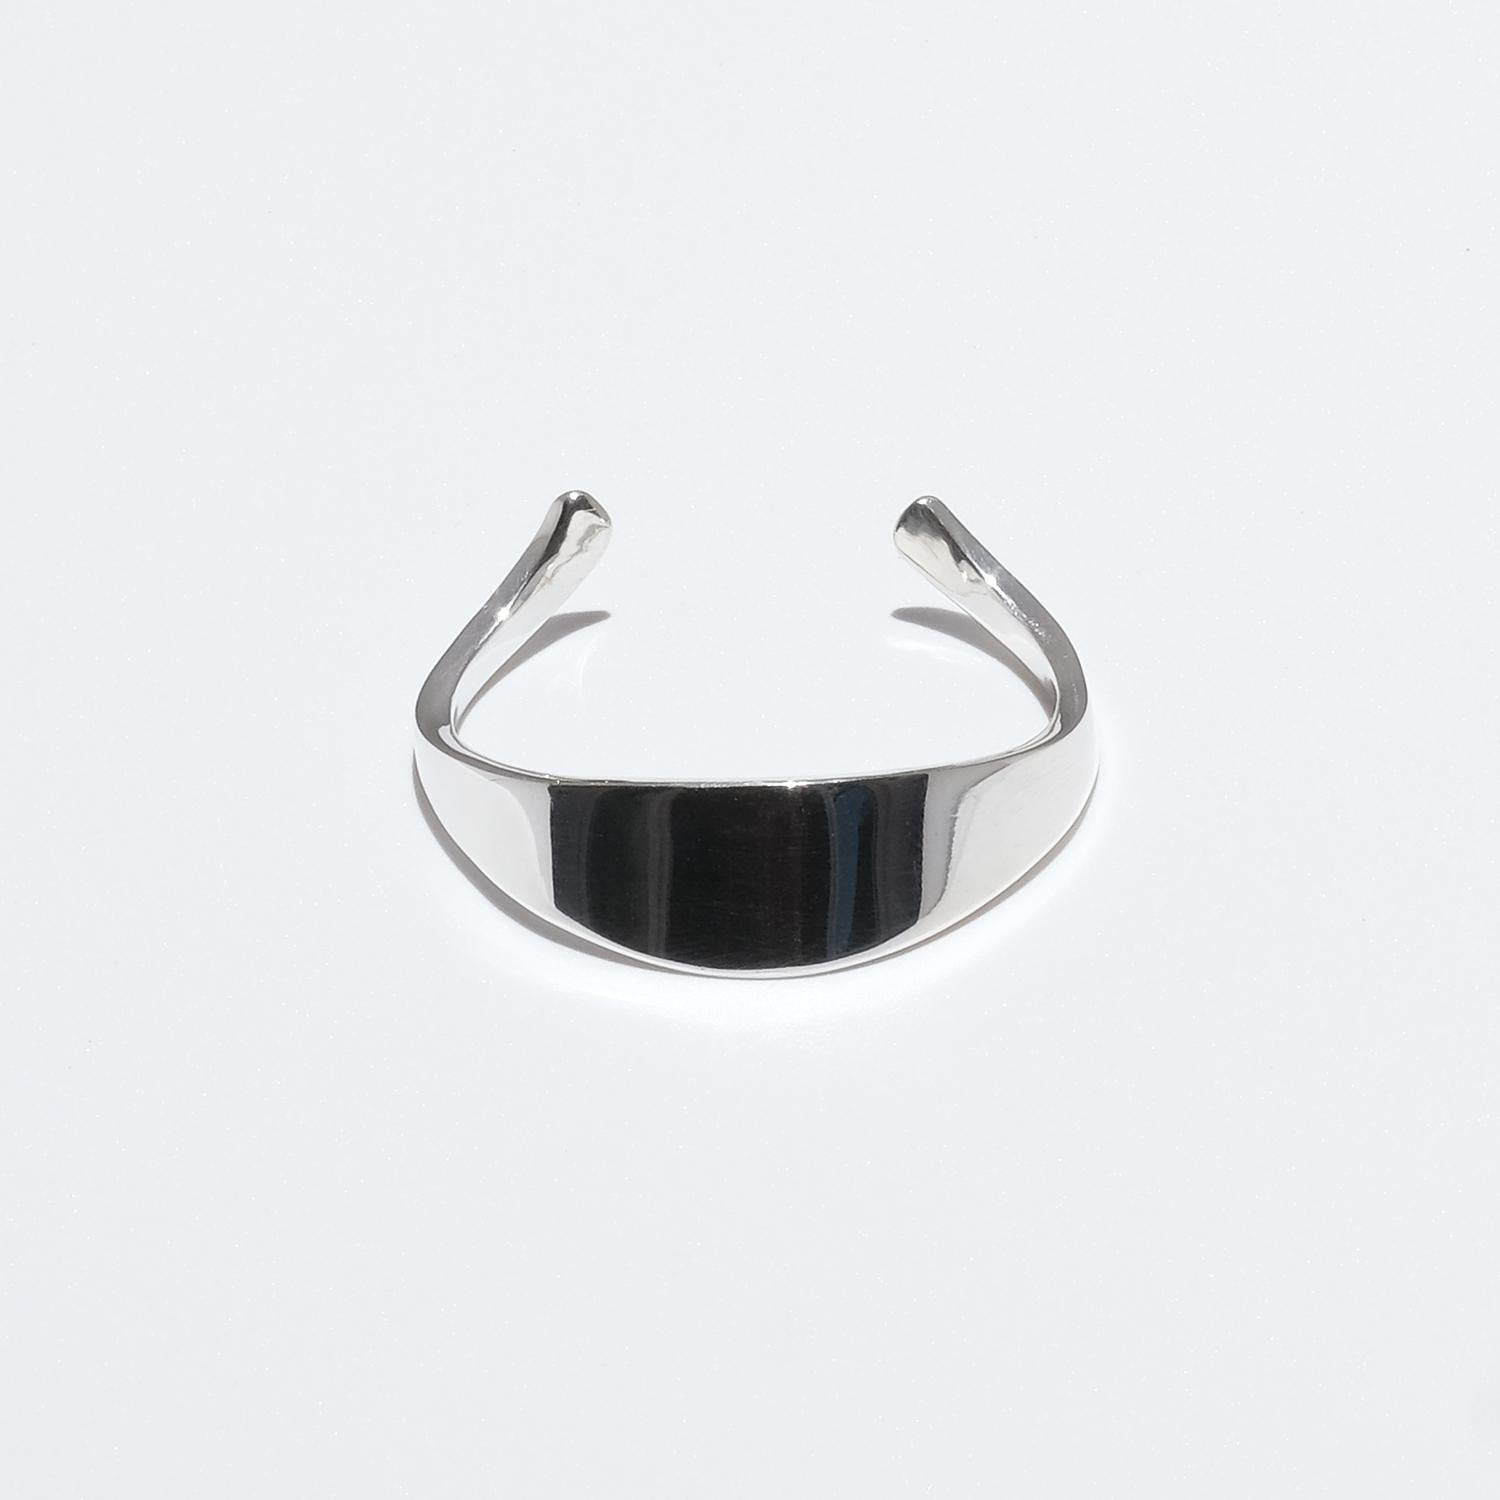 This sterling silver cuff bracelet has a glossy surface. Its shape resembles a napkin-ring with two beautifully bent arms. Its upper part runs in a straight as well as in an arciform line giving the bracelet its unique shape.

This bracelet may not